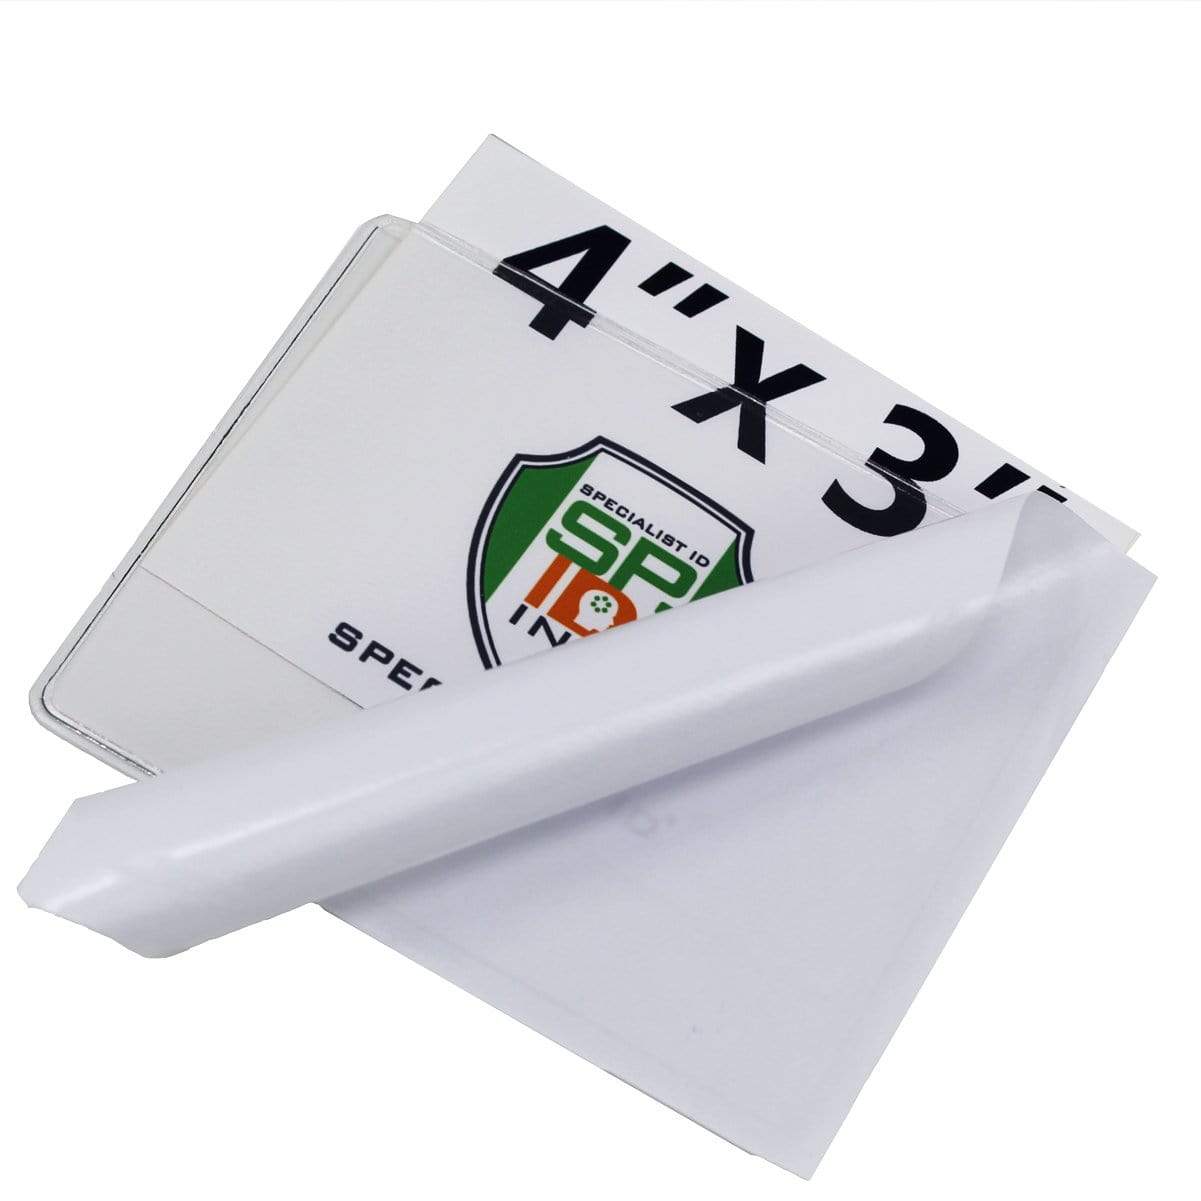 Large Adhesive Badge Holders For 4 X 3 Inch Parking Passes and Credentials ( CE-4P)